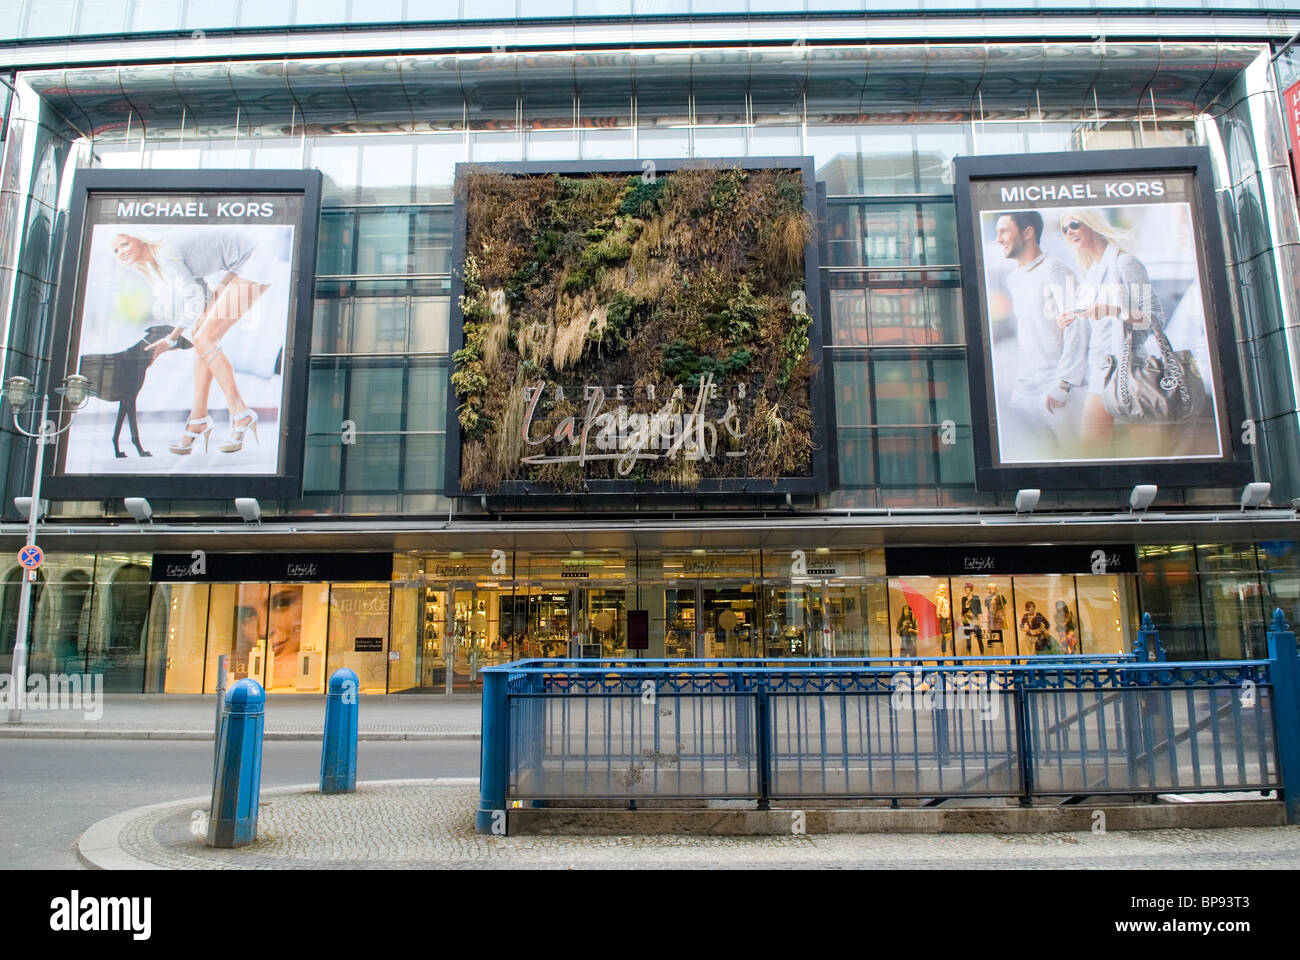 Galeris lafayette shopping mall building Europe Allemagne Berlin city Banque D'Images